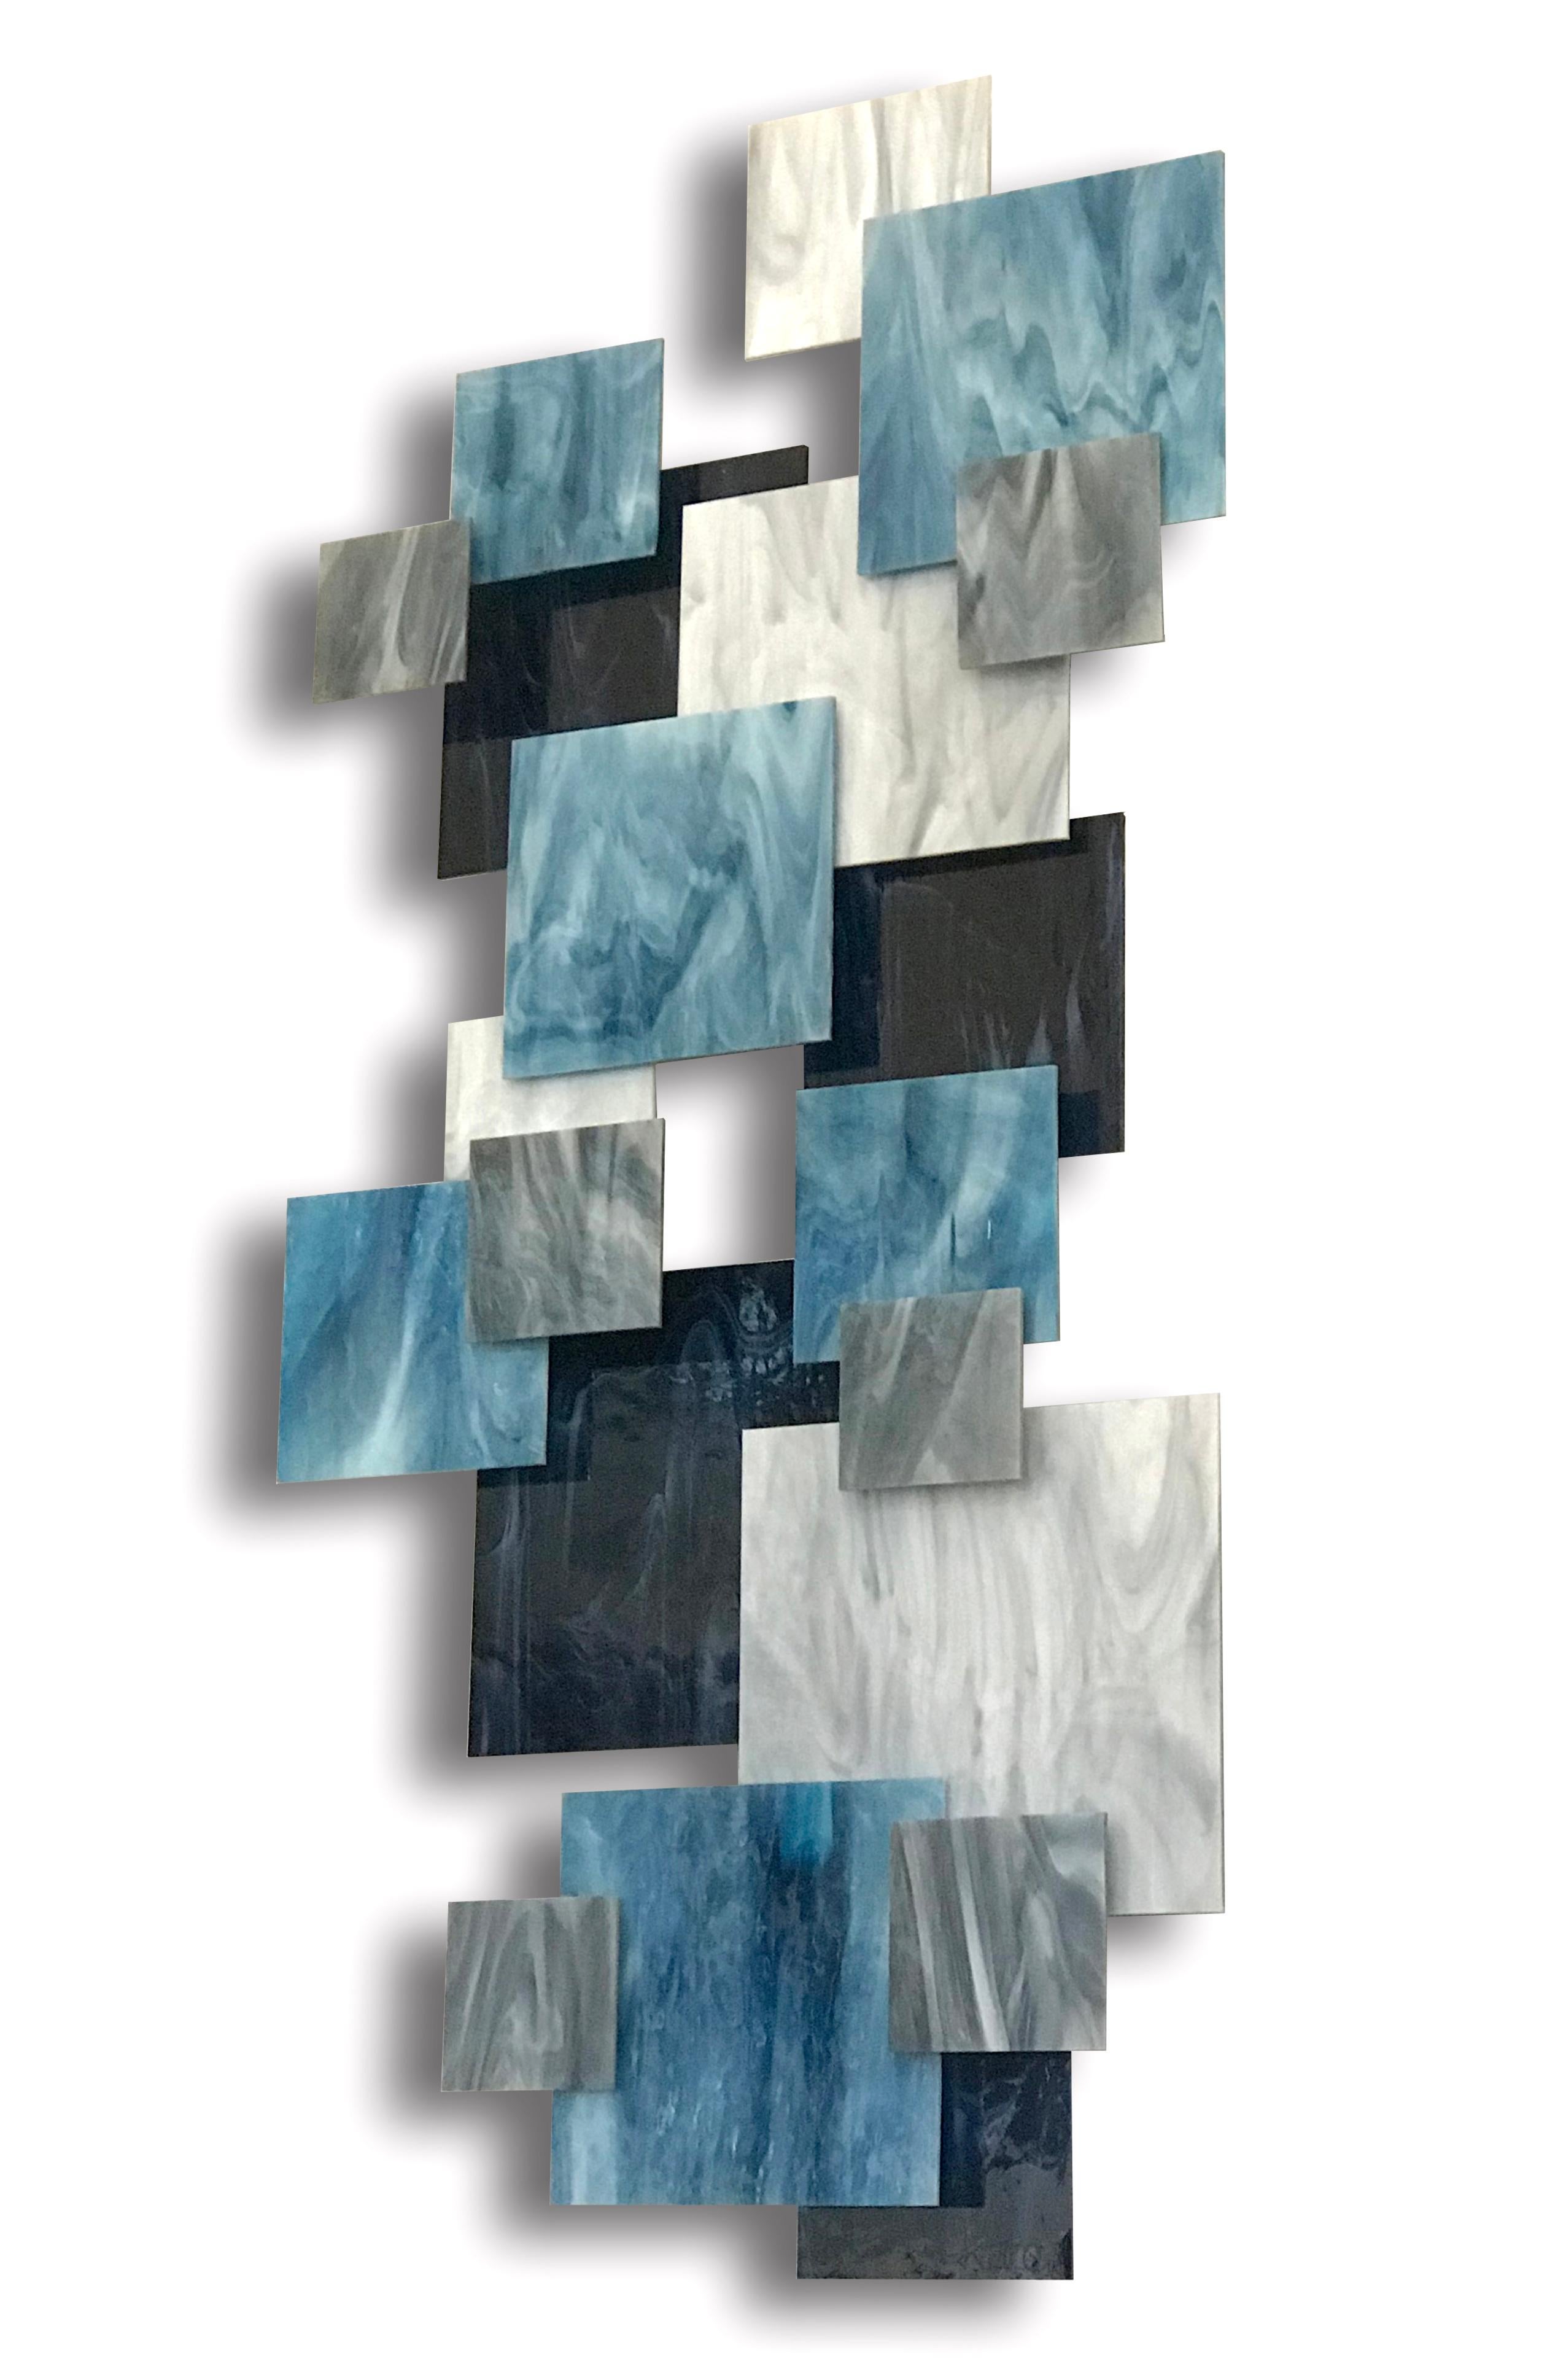 Individual pieces of glass are hand cut and placed over a welded metal frame on different elevations to create a 3D dynamic and harmonious composition. Each piece is hand created by the artist Karo Martirosyan in his studio in Los Angeles. With a